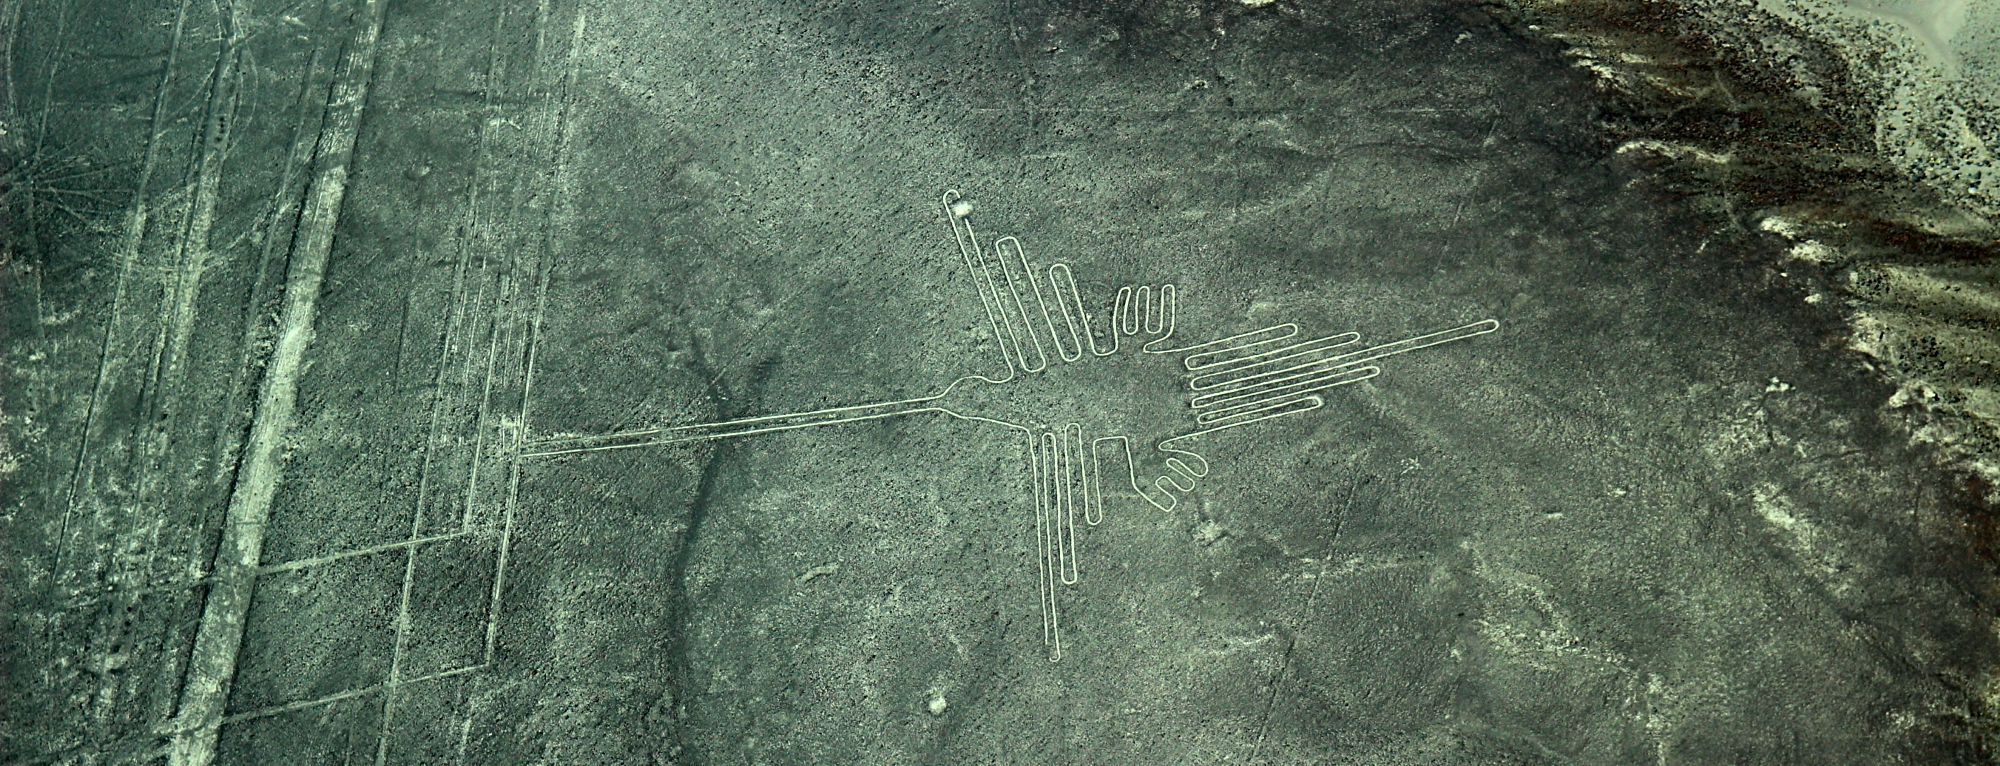 Nazca and Huacachina - Of Figures and Oases